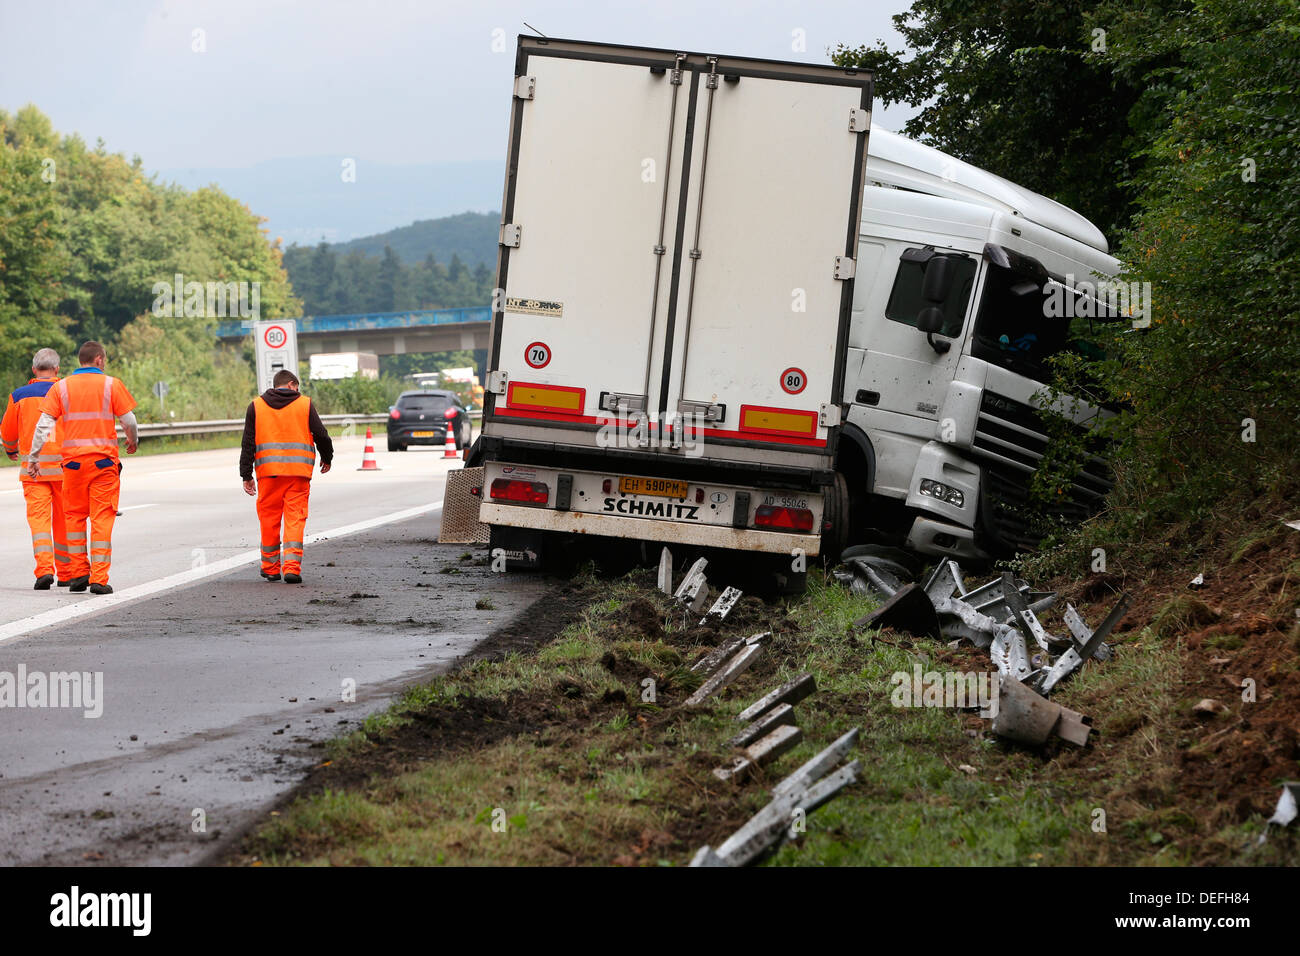 Truck accident on the A61 motorway, near Waldesch, Rhineland-Palatinate, Germany Stock Photo